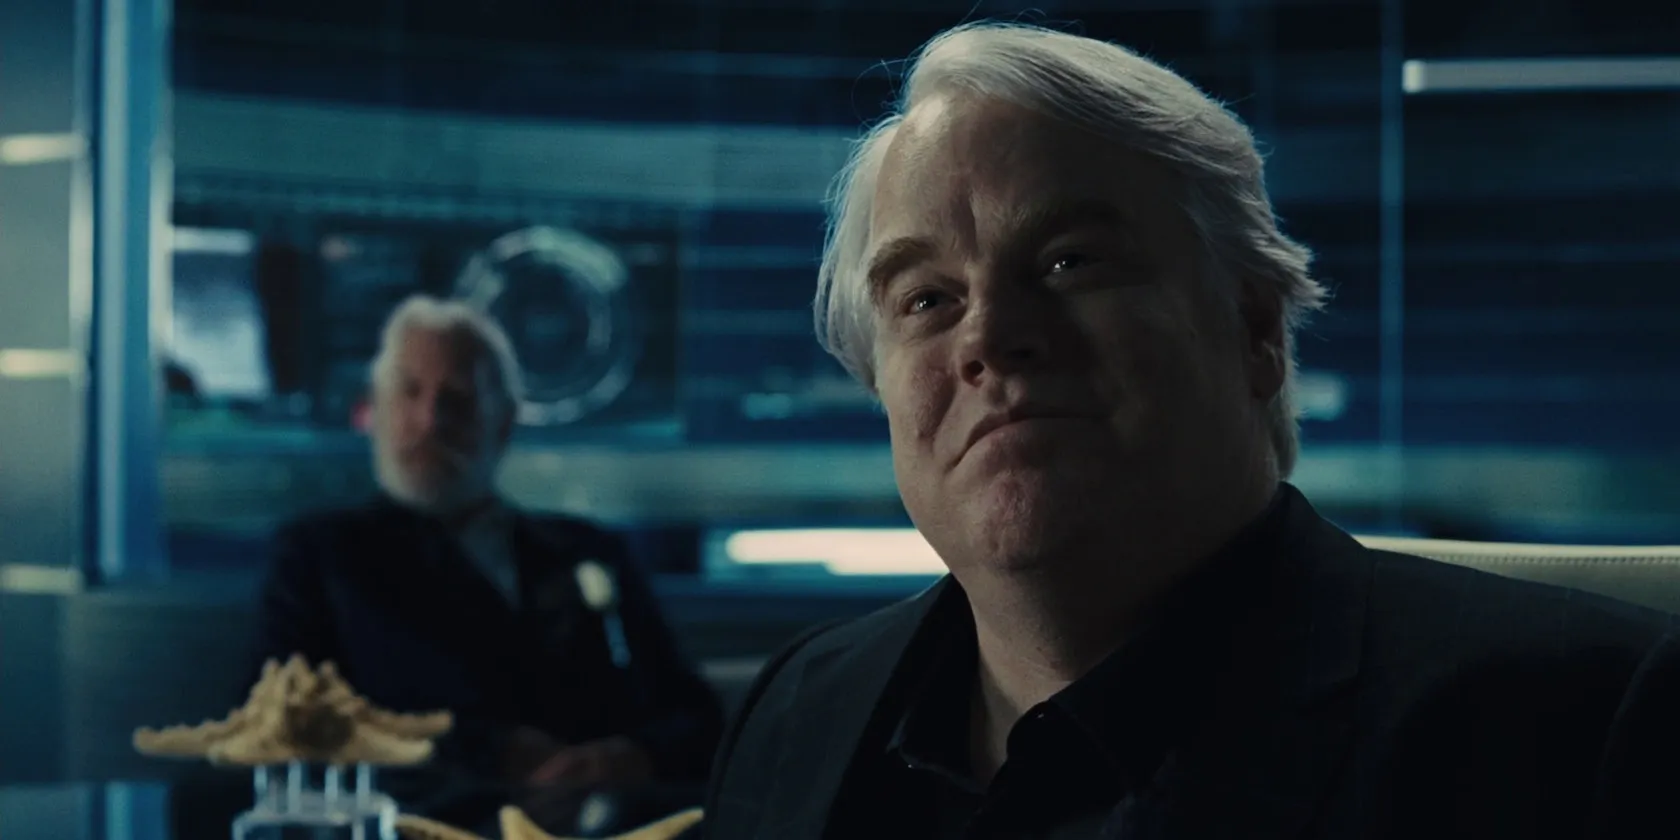 plutarch in the hunger games